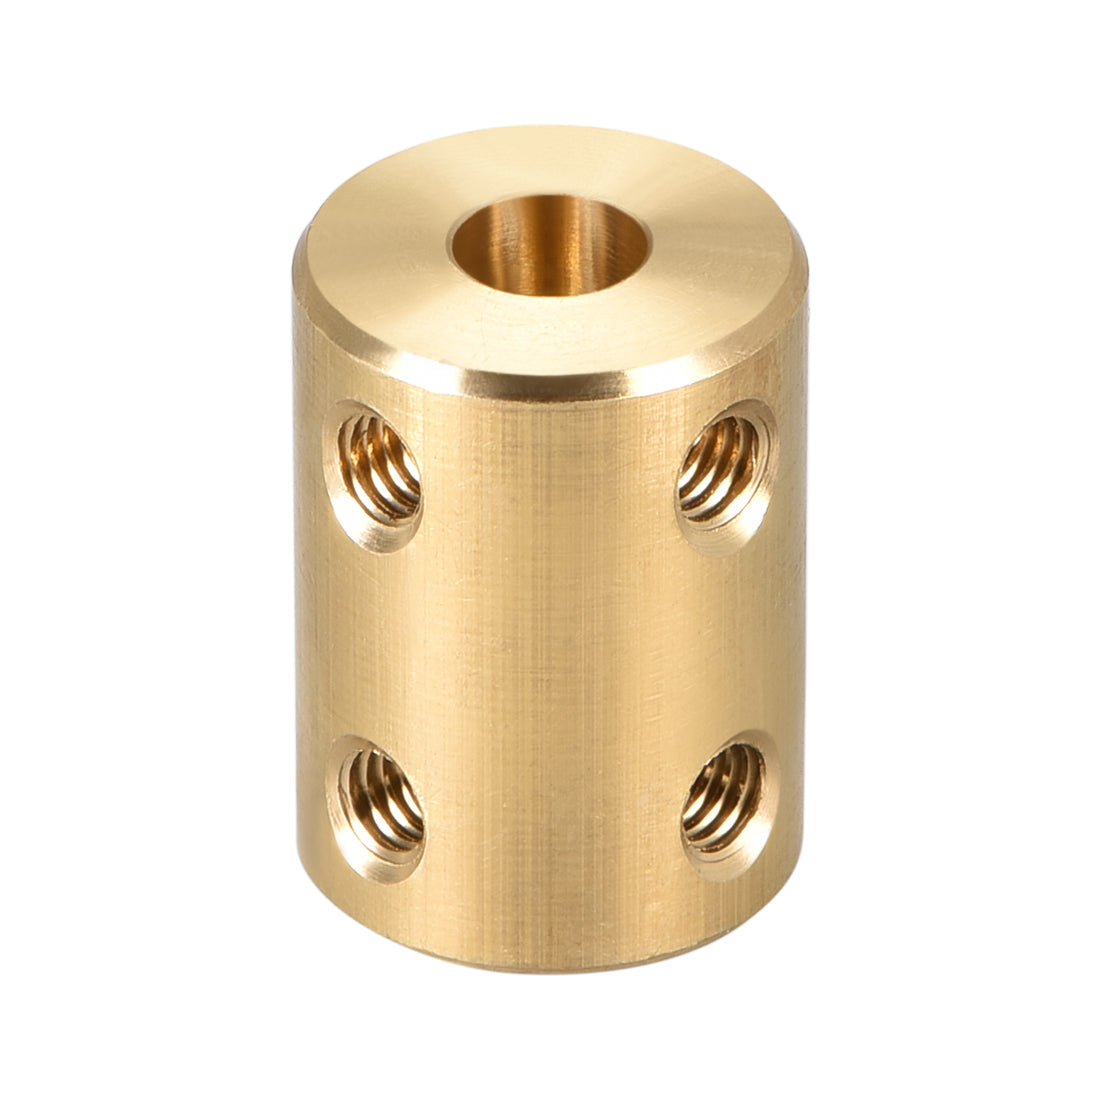 uxcell Uxcell Shaft Coupling 6mm to 10mm Bore L22xD16 Robot Motor Wheel Rigid Coupler Connector Gold Tone